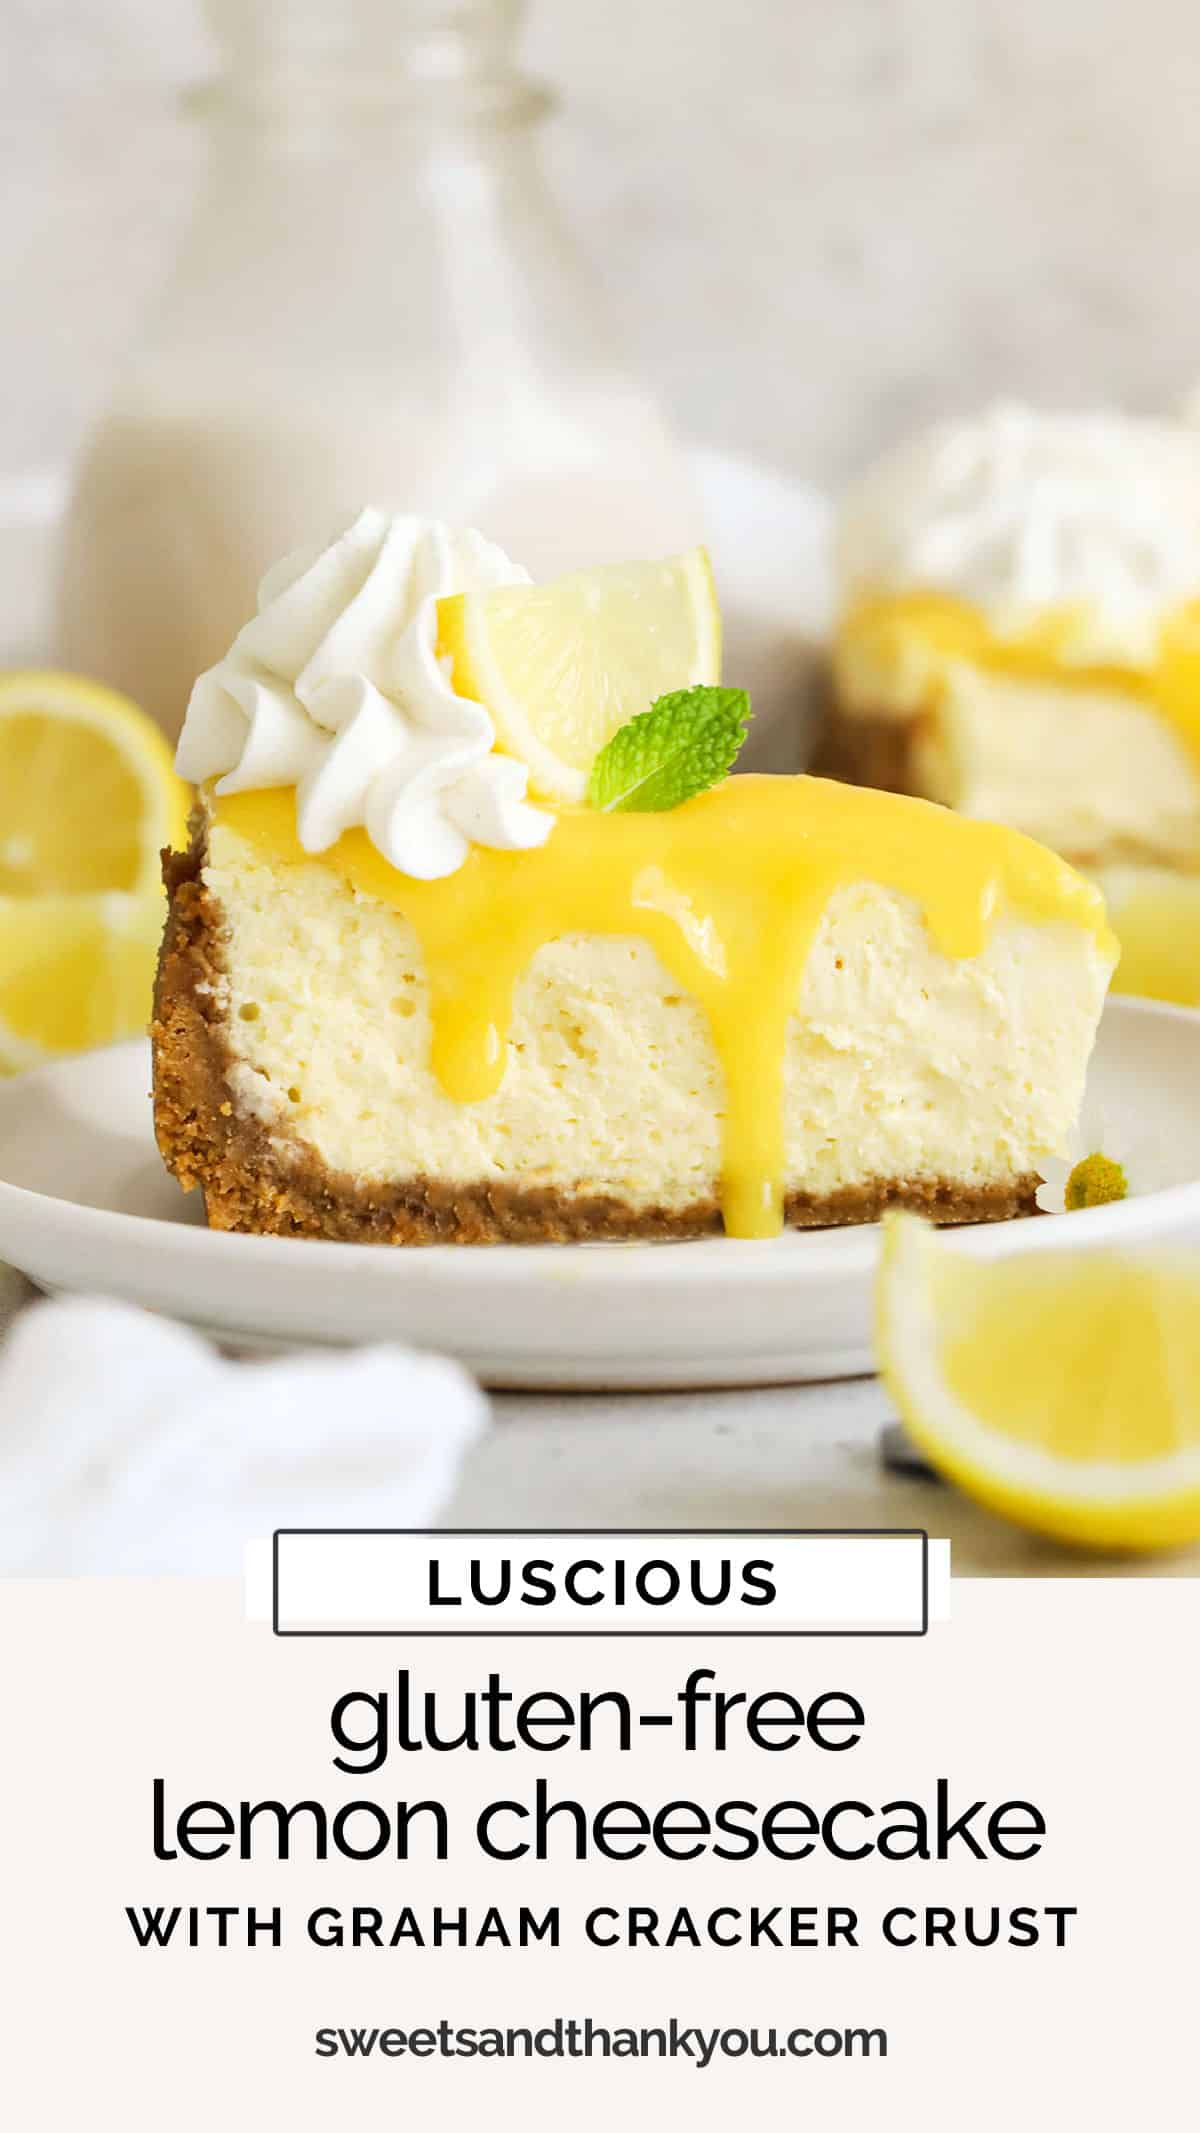 Our Gluten-Free Lemon Cheesecake recipe is the perfect lemon dessert recipe for lemon lovers! A buttery graham cracker crust, luscious lemon filling, zesty lemon curd, and fluffy whipped cream make each bite delicious! This gluten-free cheesecake recipe is the perfect spring dessert for Easter or Mother's Day, or makes an impressive Thanksgiving or holiday dessert. You won't want to miss it! 